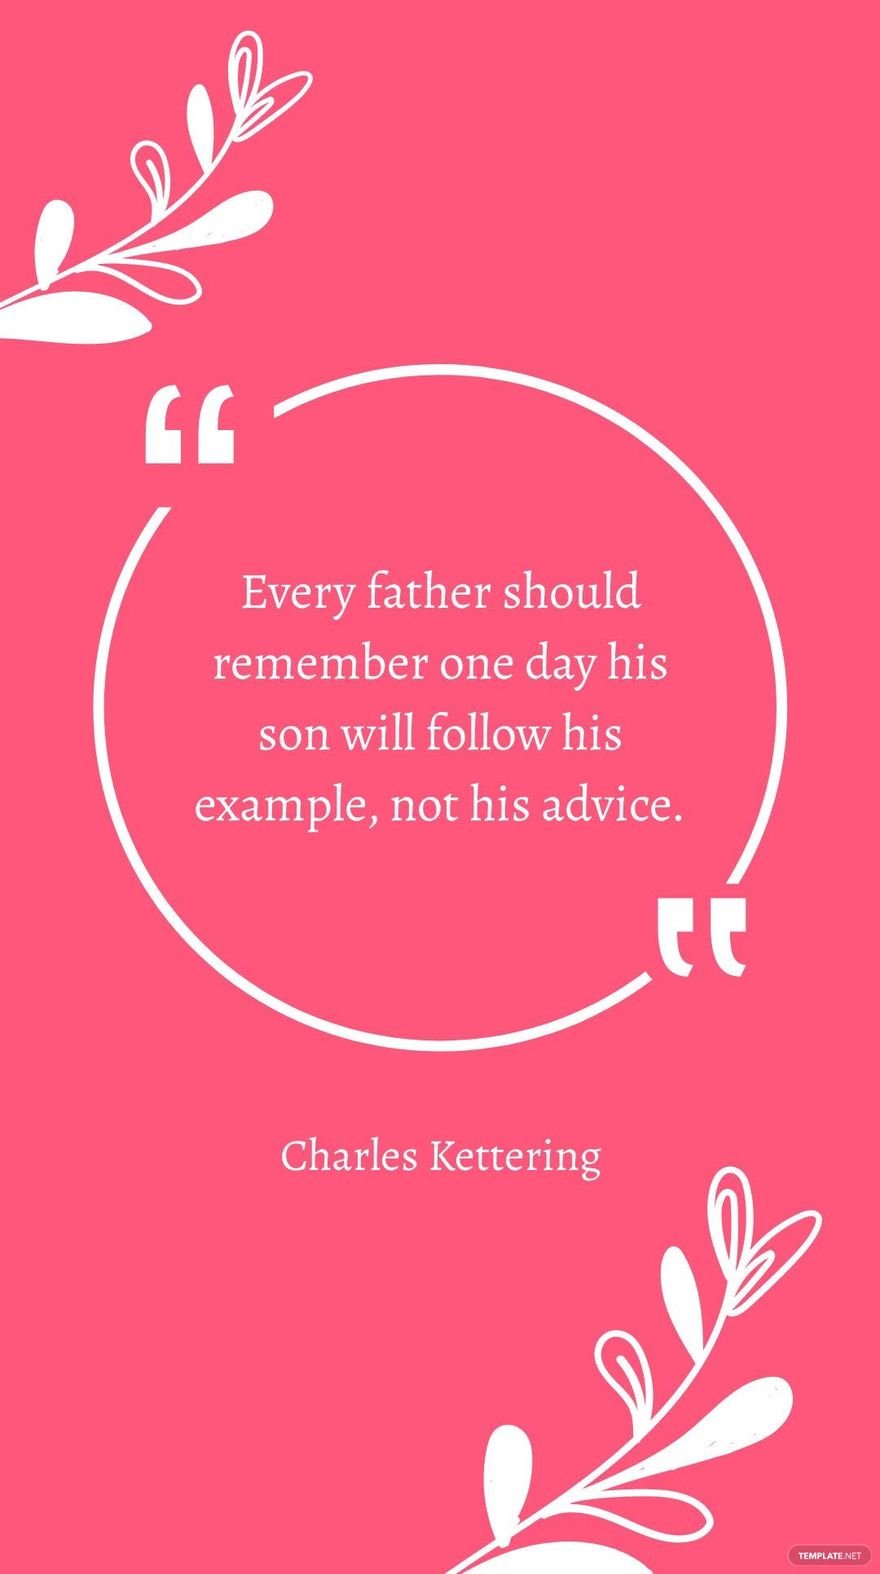 Charles Kettering - Every father should remember one day his son will follow his example, not his advice.